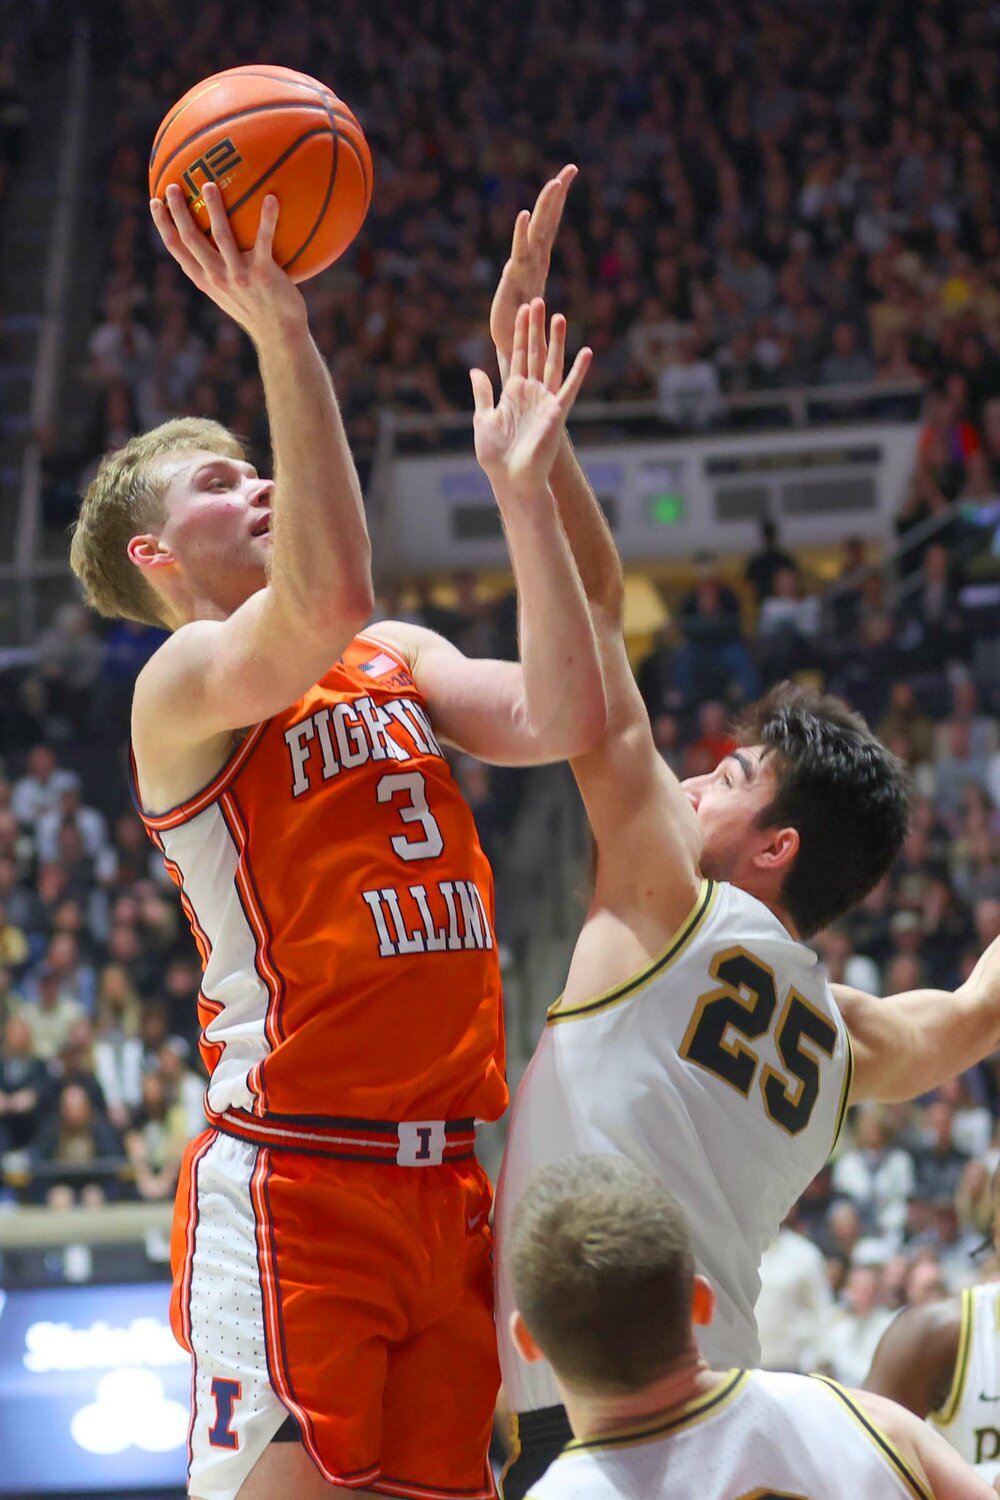 Marcus Domask of Illinois - shooting a short jumper over the defense of Ethan Morton of Purdue